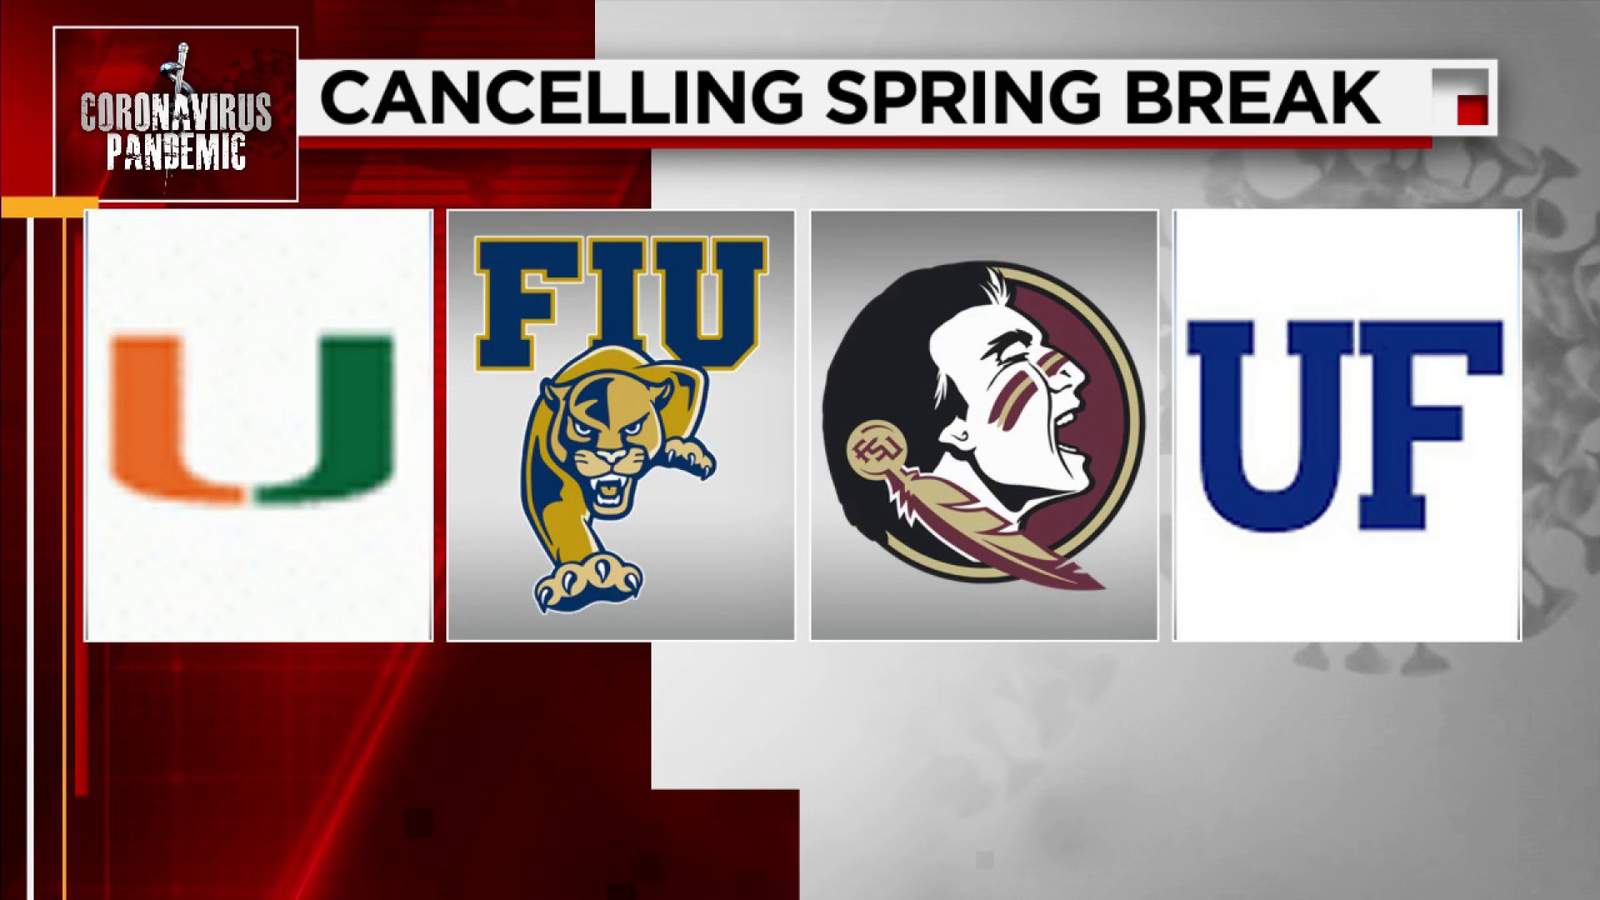 UM and FIU join UF and FSU on Spring Break 2021 cancellation